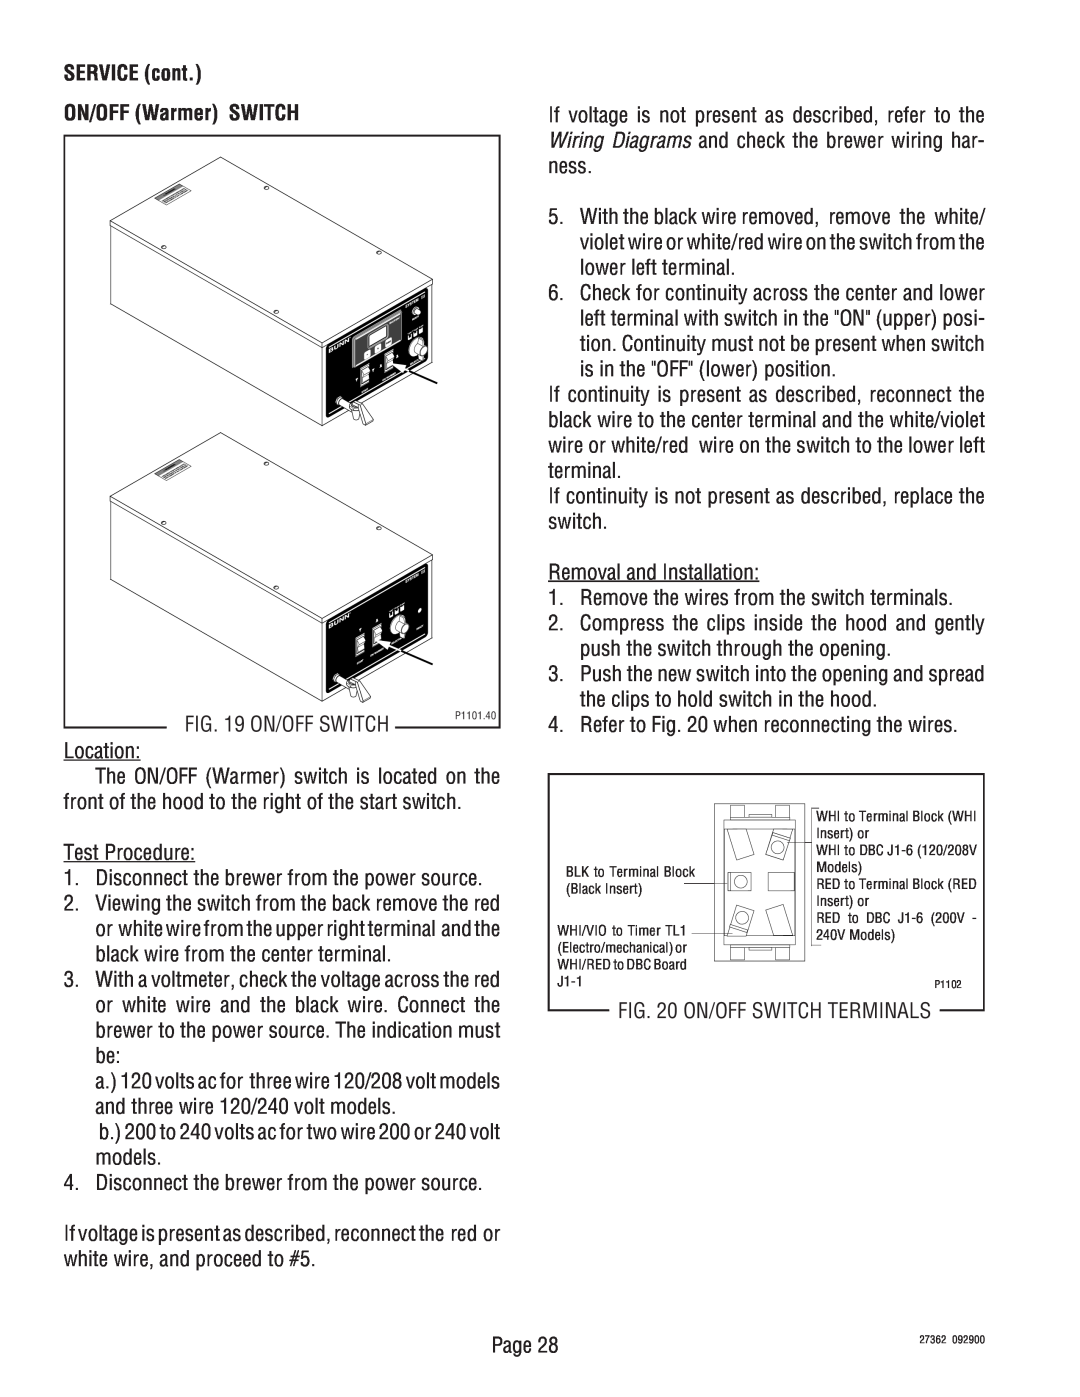 Bunn System III manual SERVICE cont ON/OFF Warmer SWITCH 